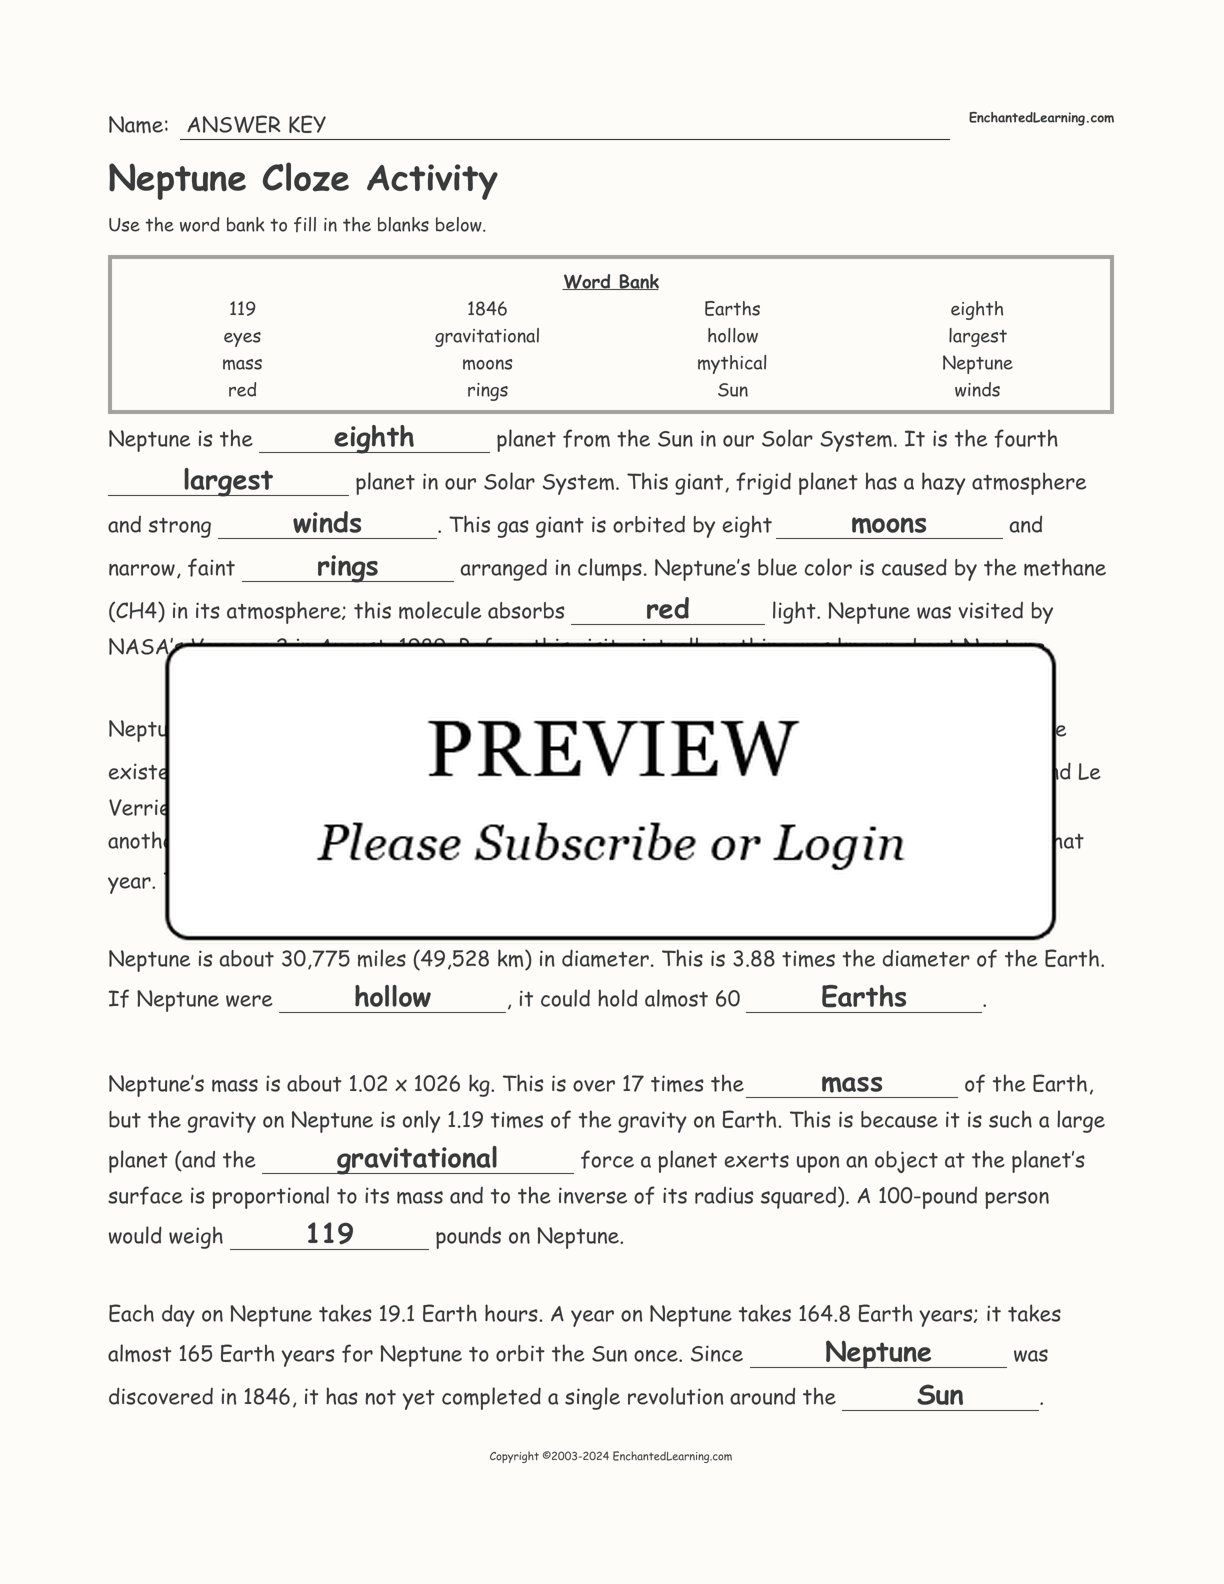 Neptune Cloze Activity interactive worksheet page 2